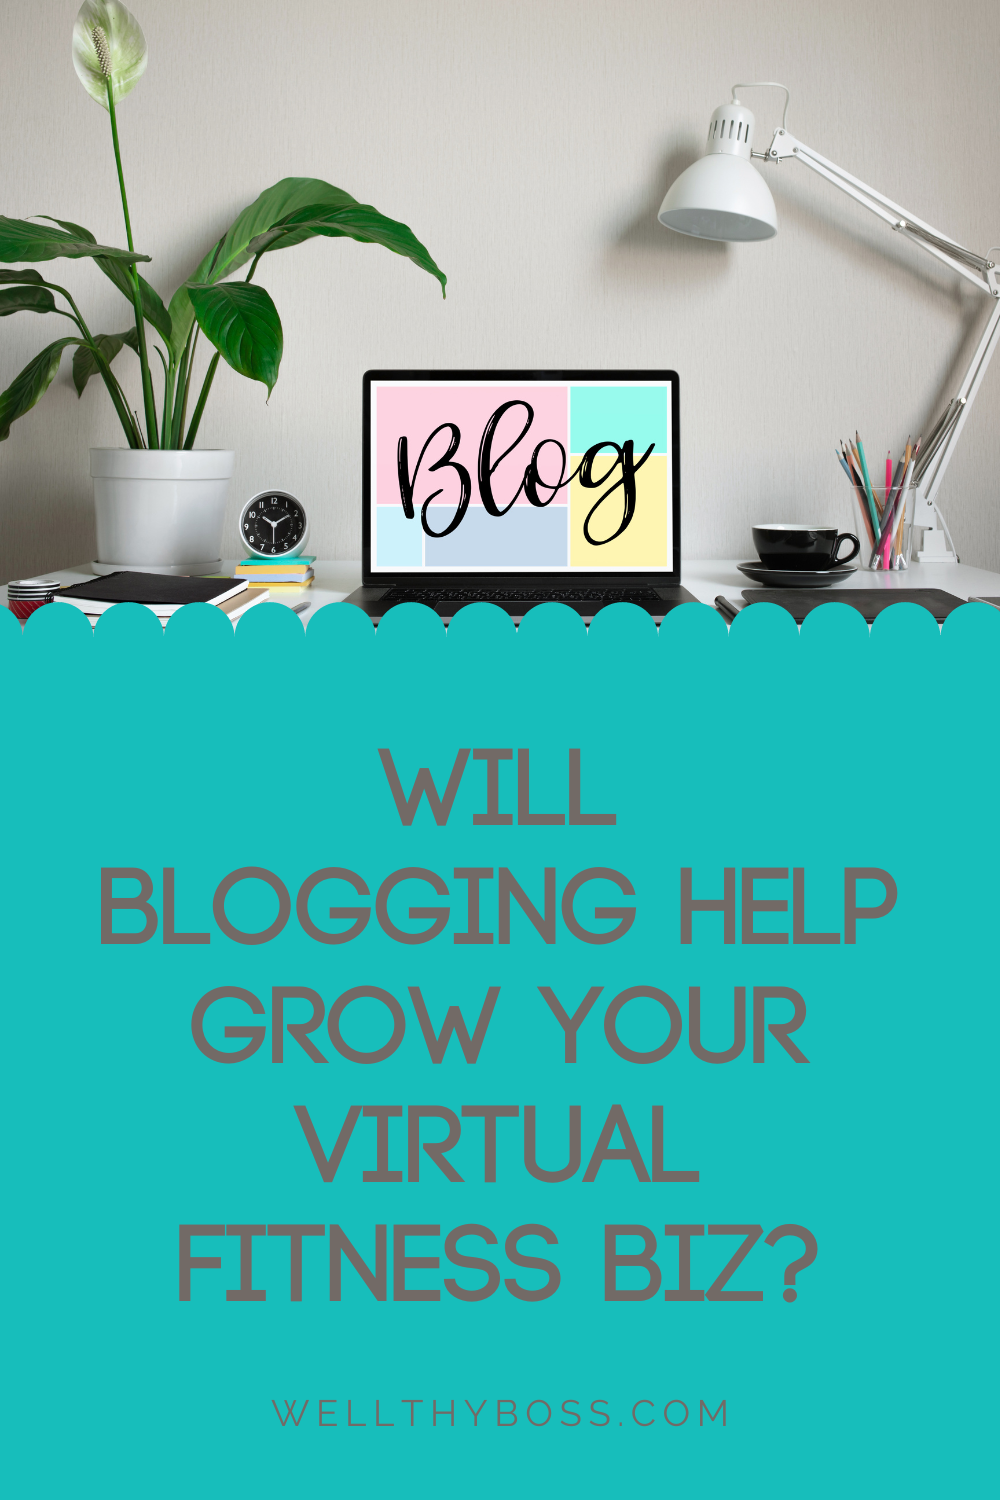 Will blogging help my virtual fitness business?